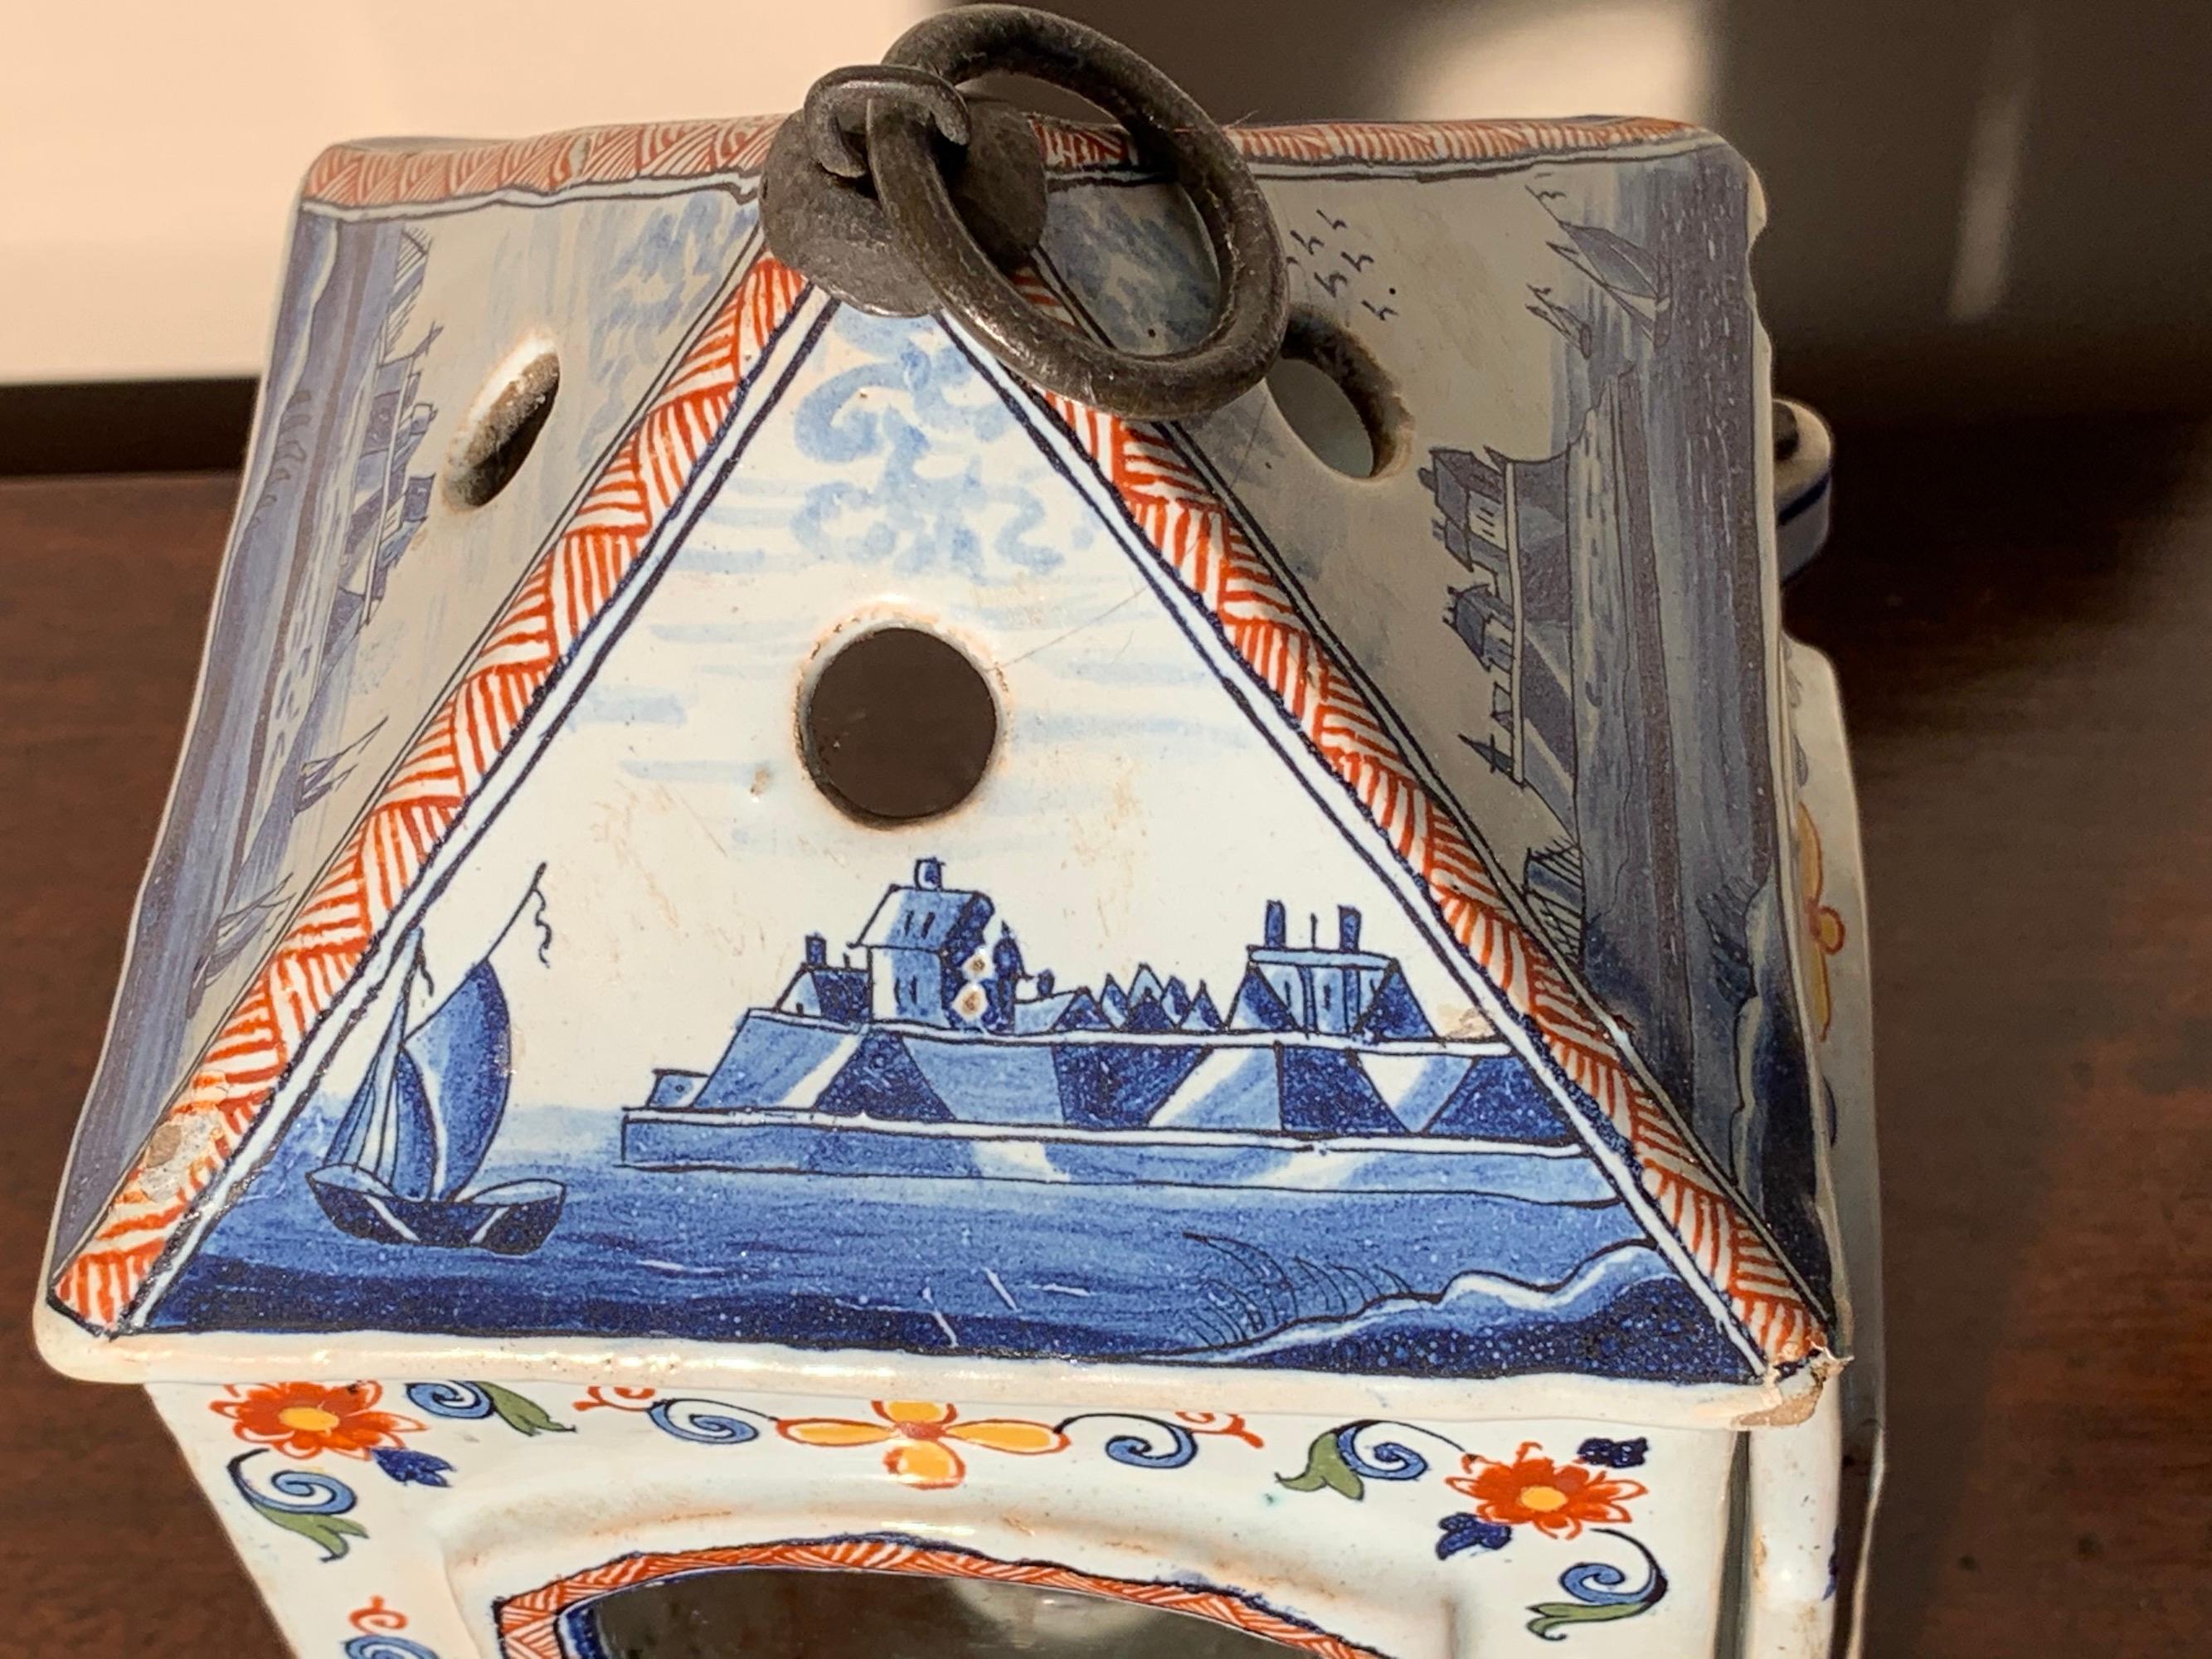 Baroque Lantern, Delftware, mid-18th Century, Dutch, Polychrome, Tryhoorn Collection For Sale